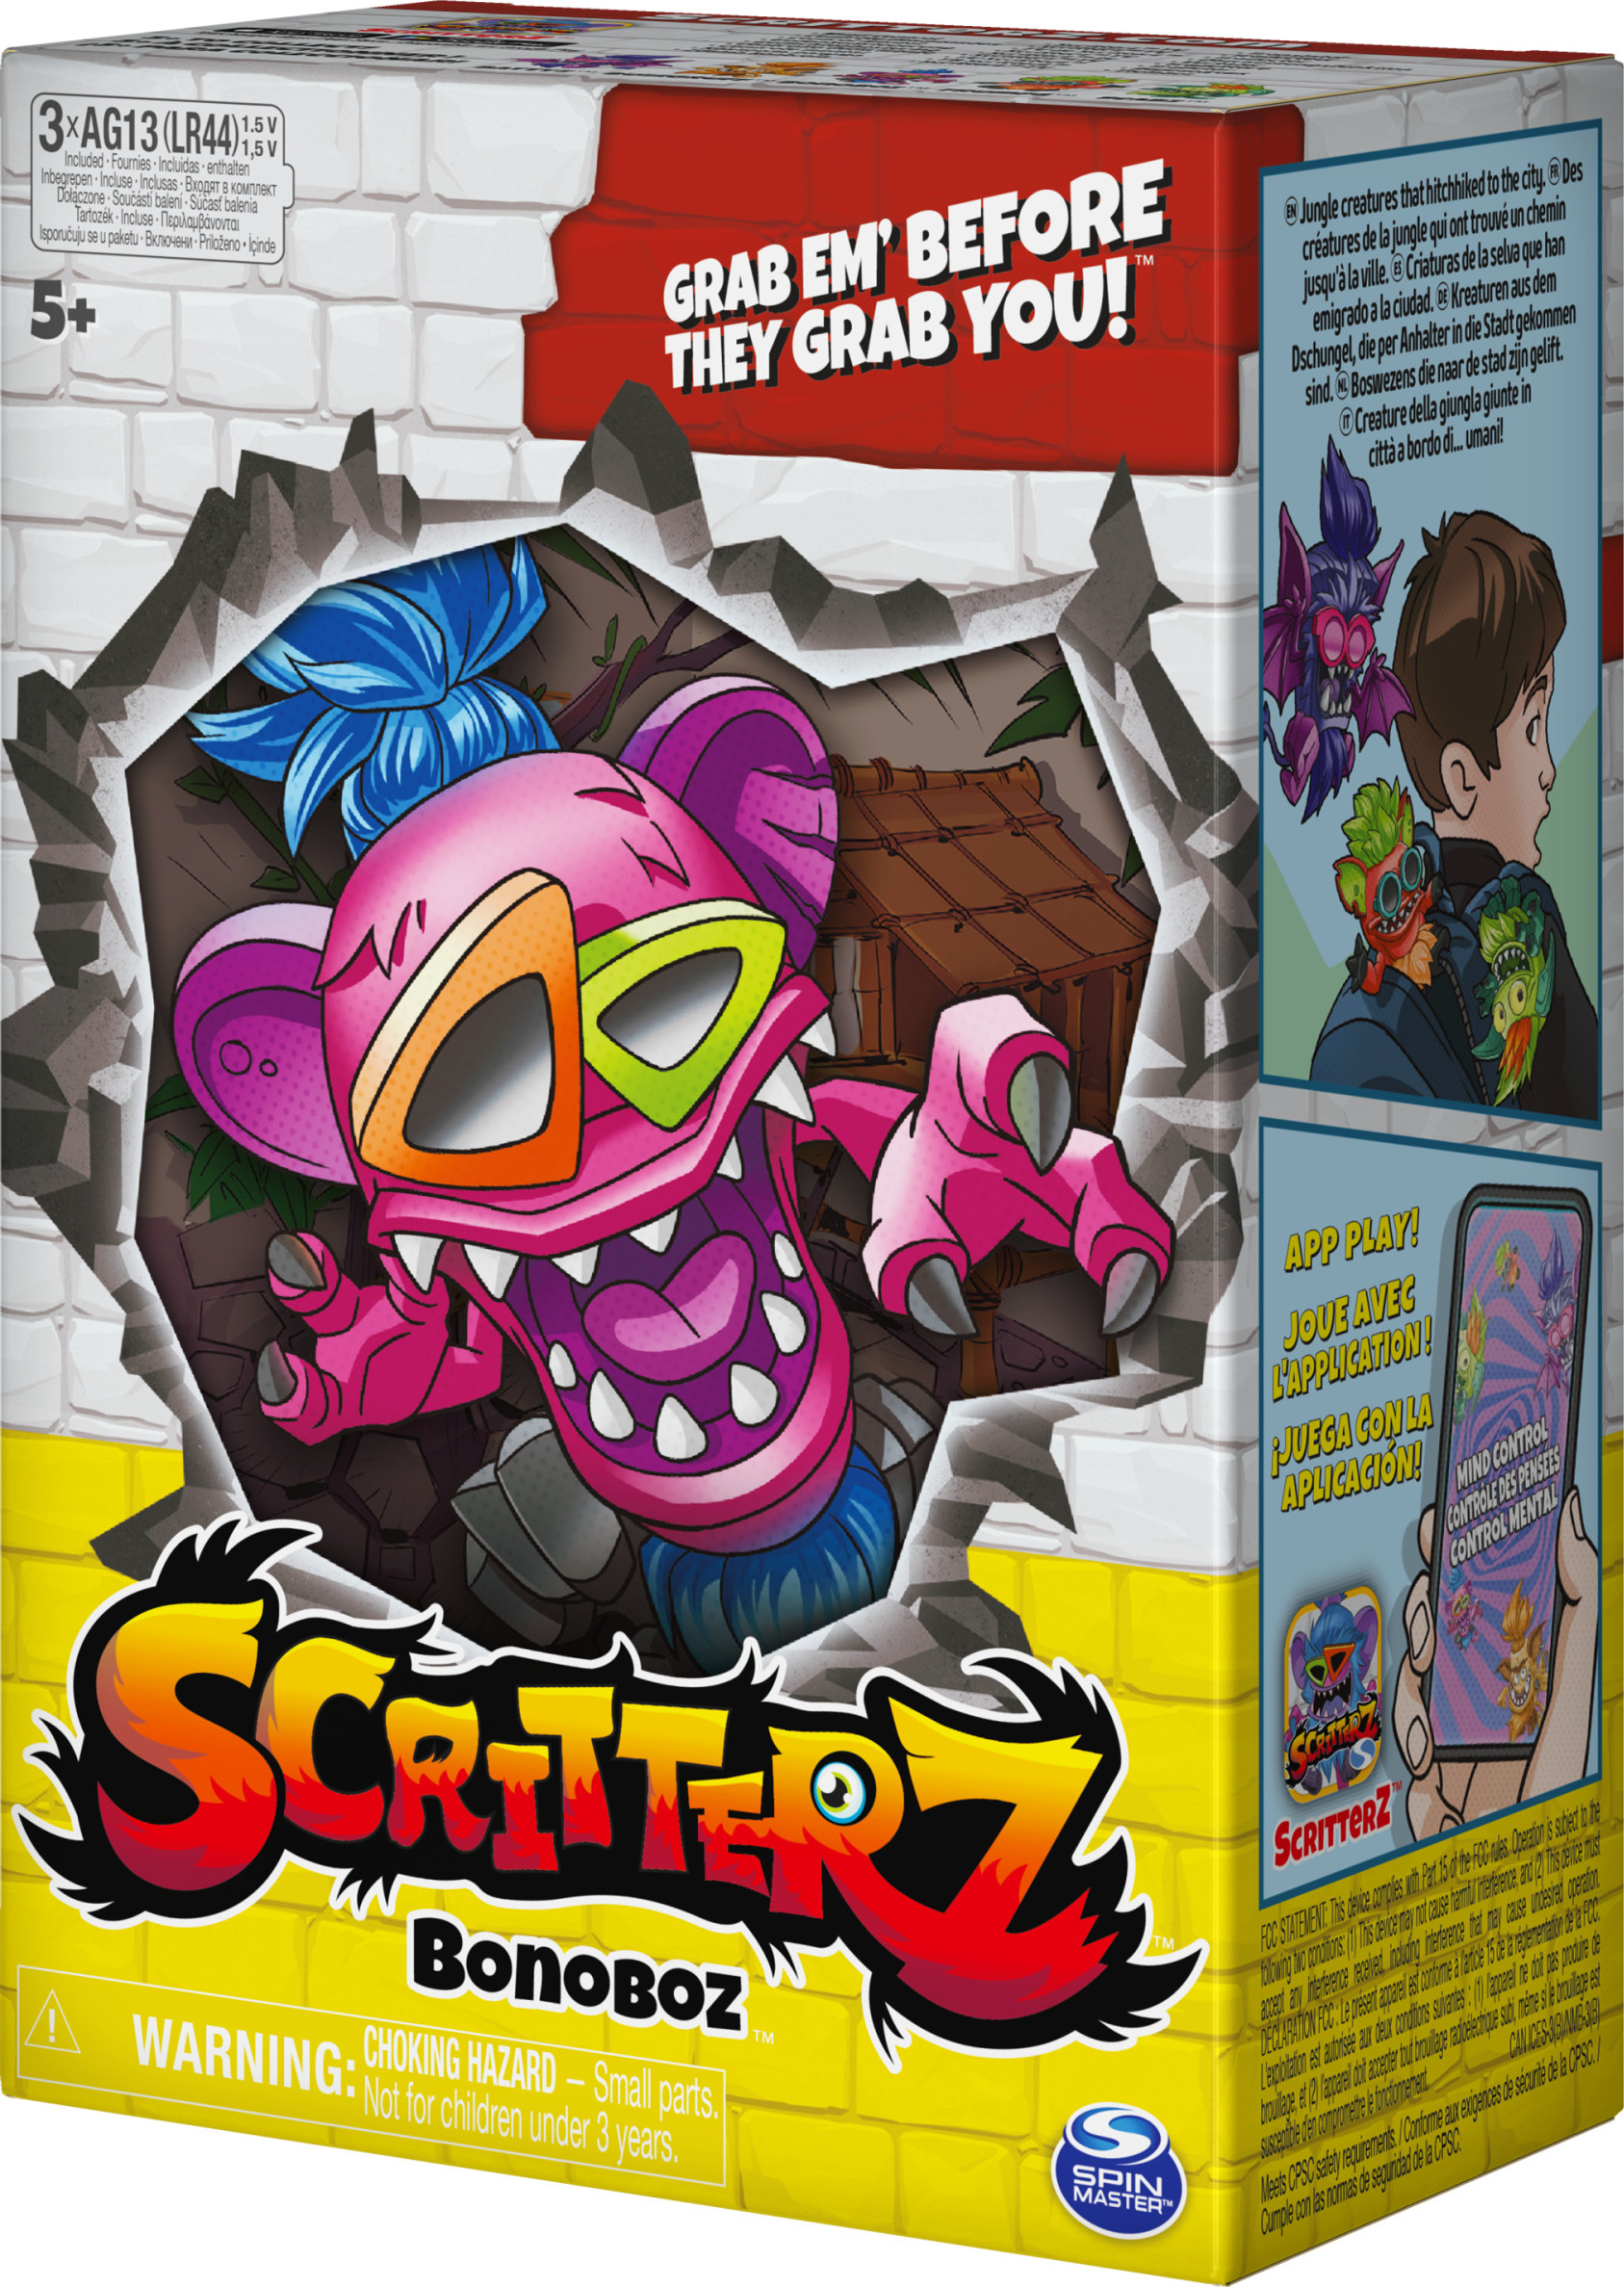 Scritterz, Bonoboz Interactive Collectible Jungle Creature Toy with Sounds and Movement, for Kids Aged 5 and up - image 7 of 8